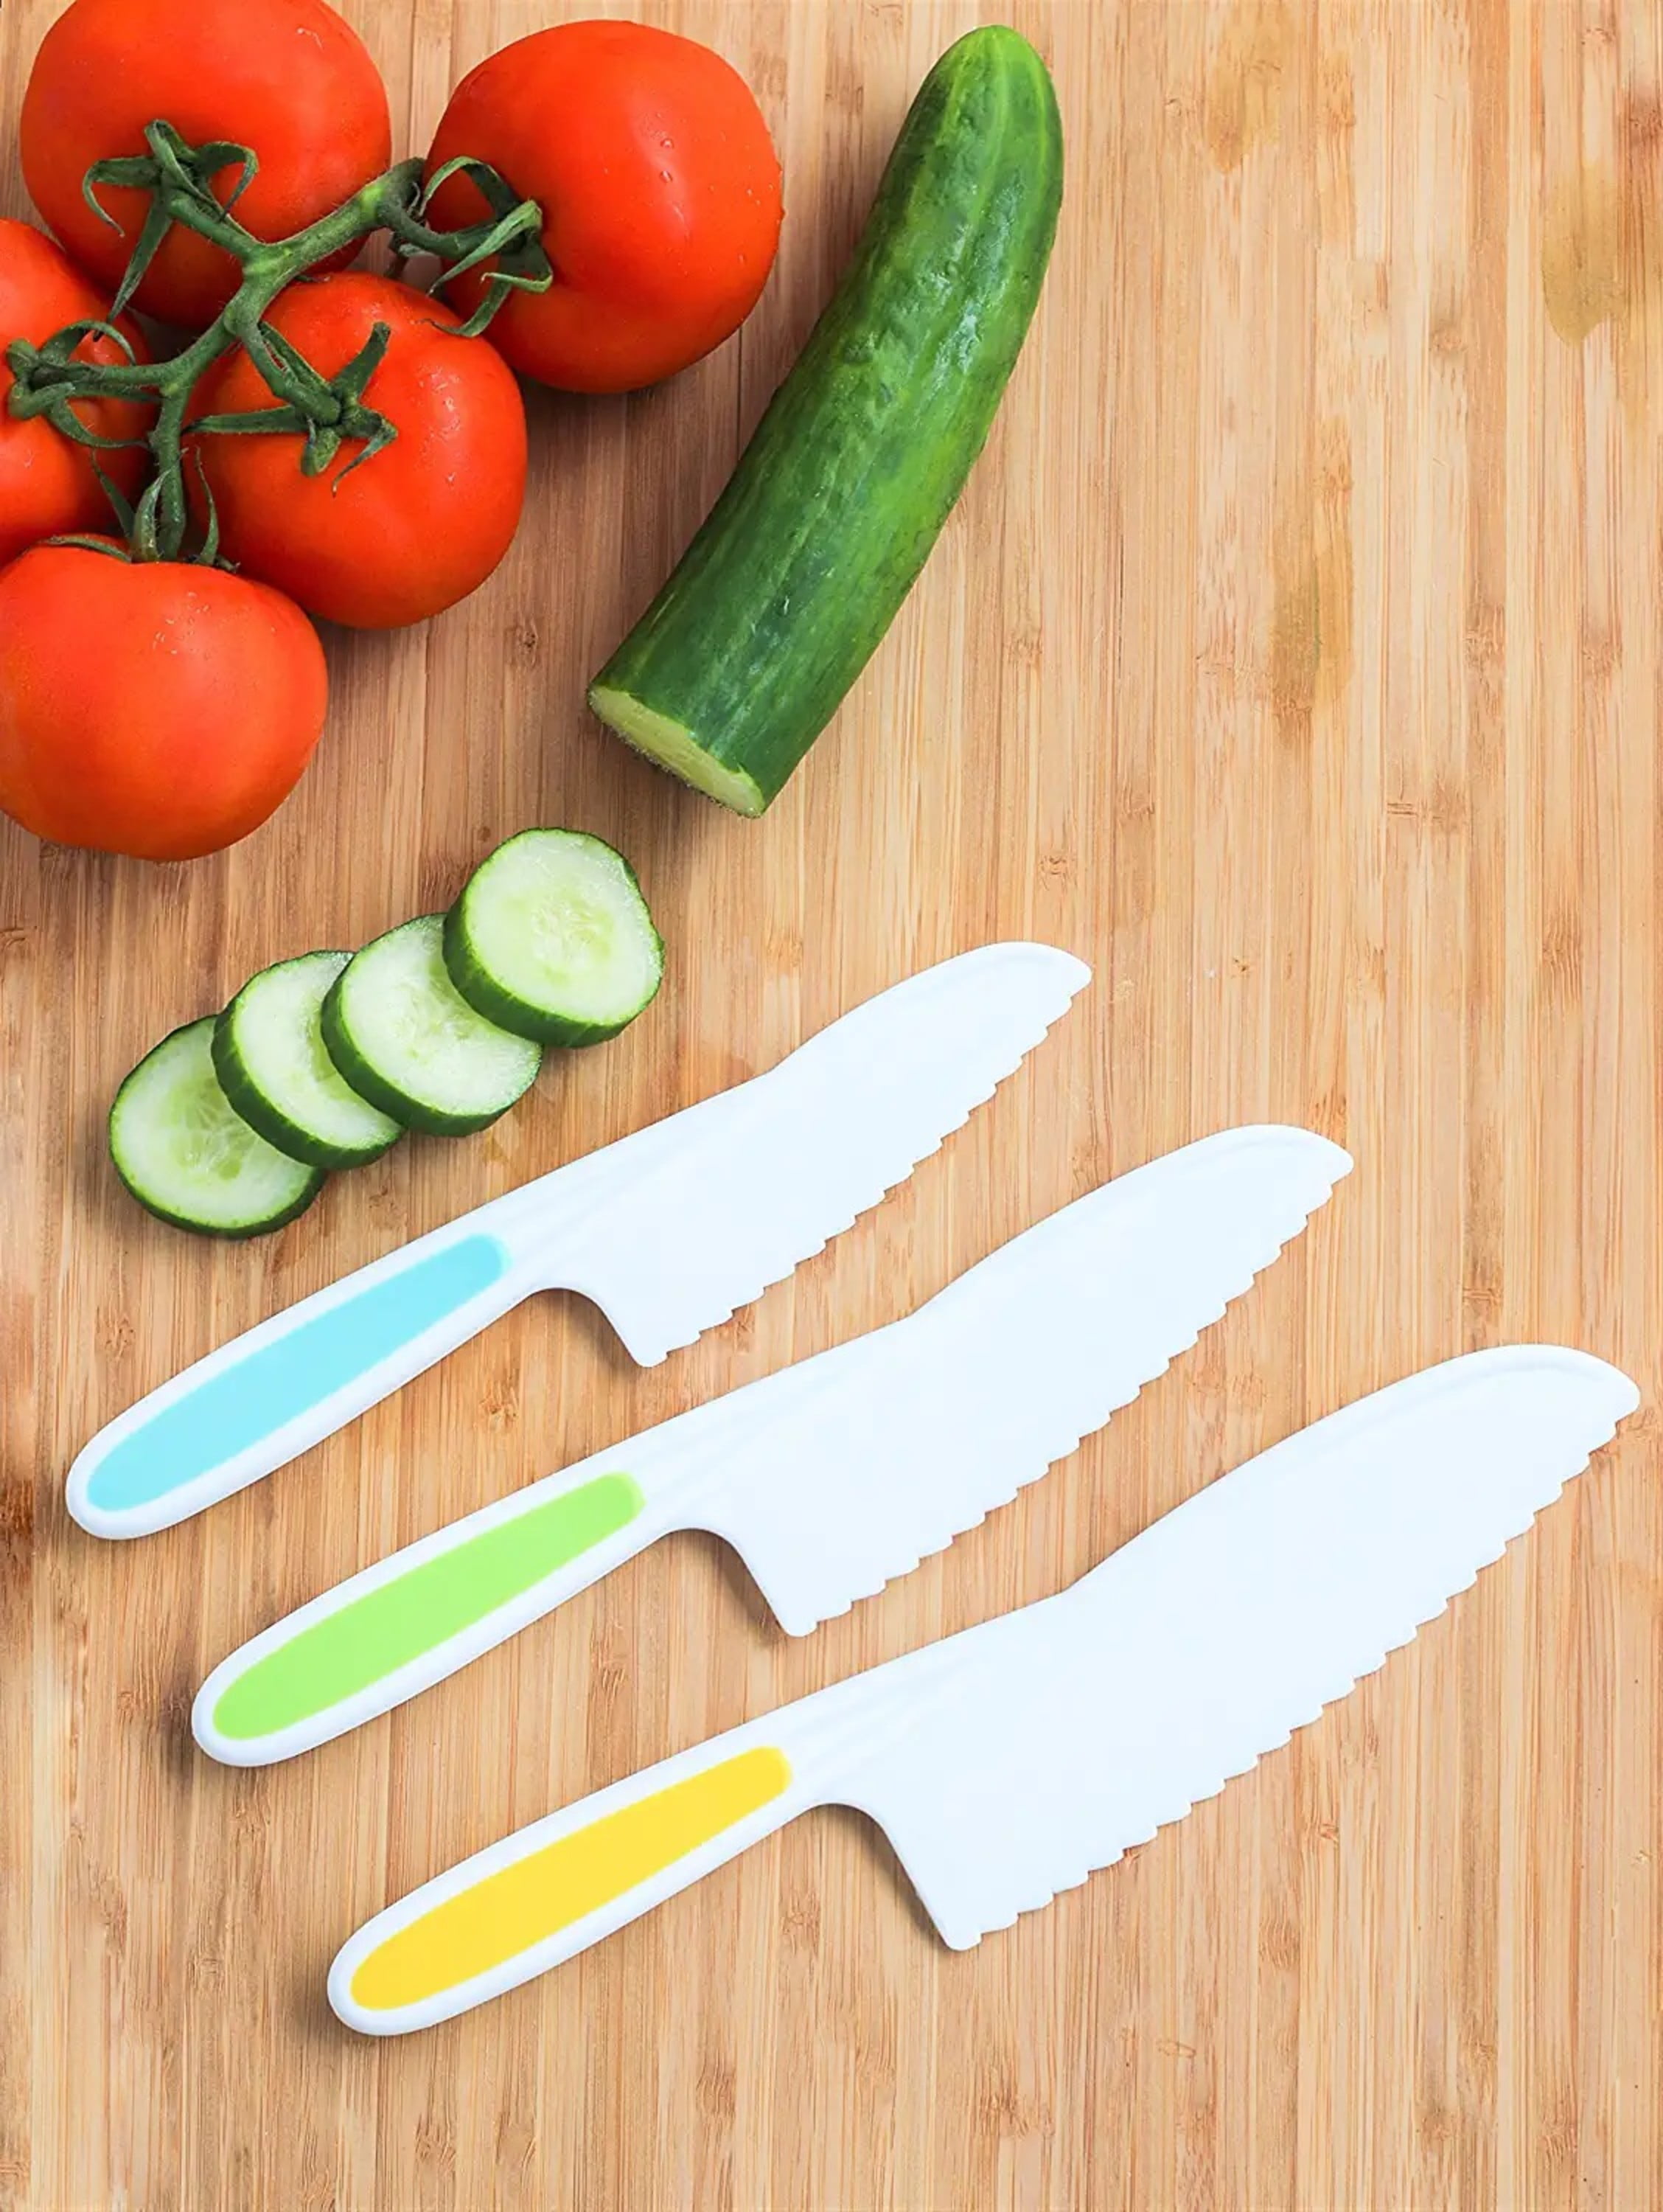 Tovla Jr. Kids Kitchen Knife and Foldable Cutting Board Set: Children's  Cooking Knives in 3 Sizes & Colors - Firm Grip, Serrated Edges, BPA-Free  Kids' Knives/Safe Lettuce and Salad Knives - Green 